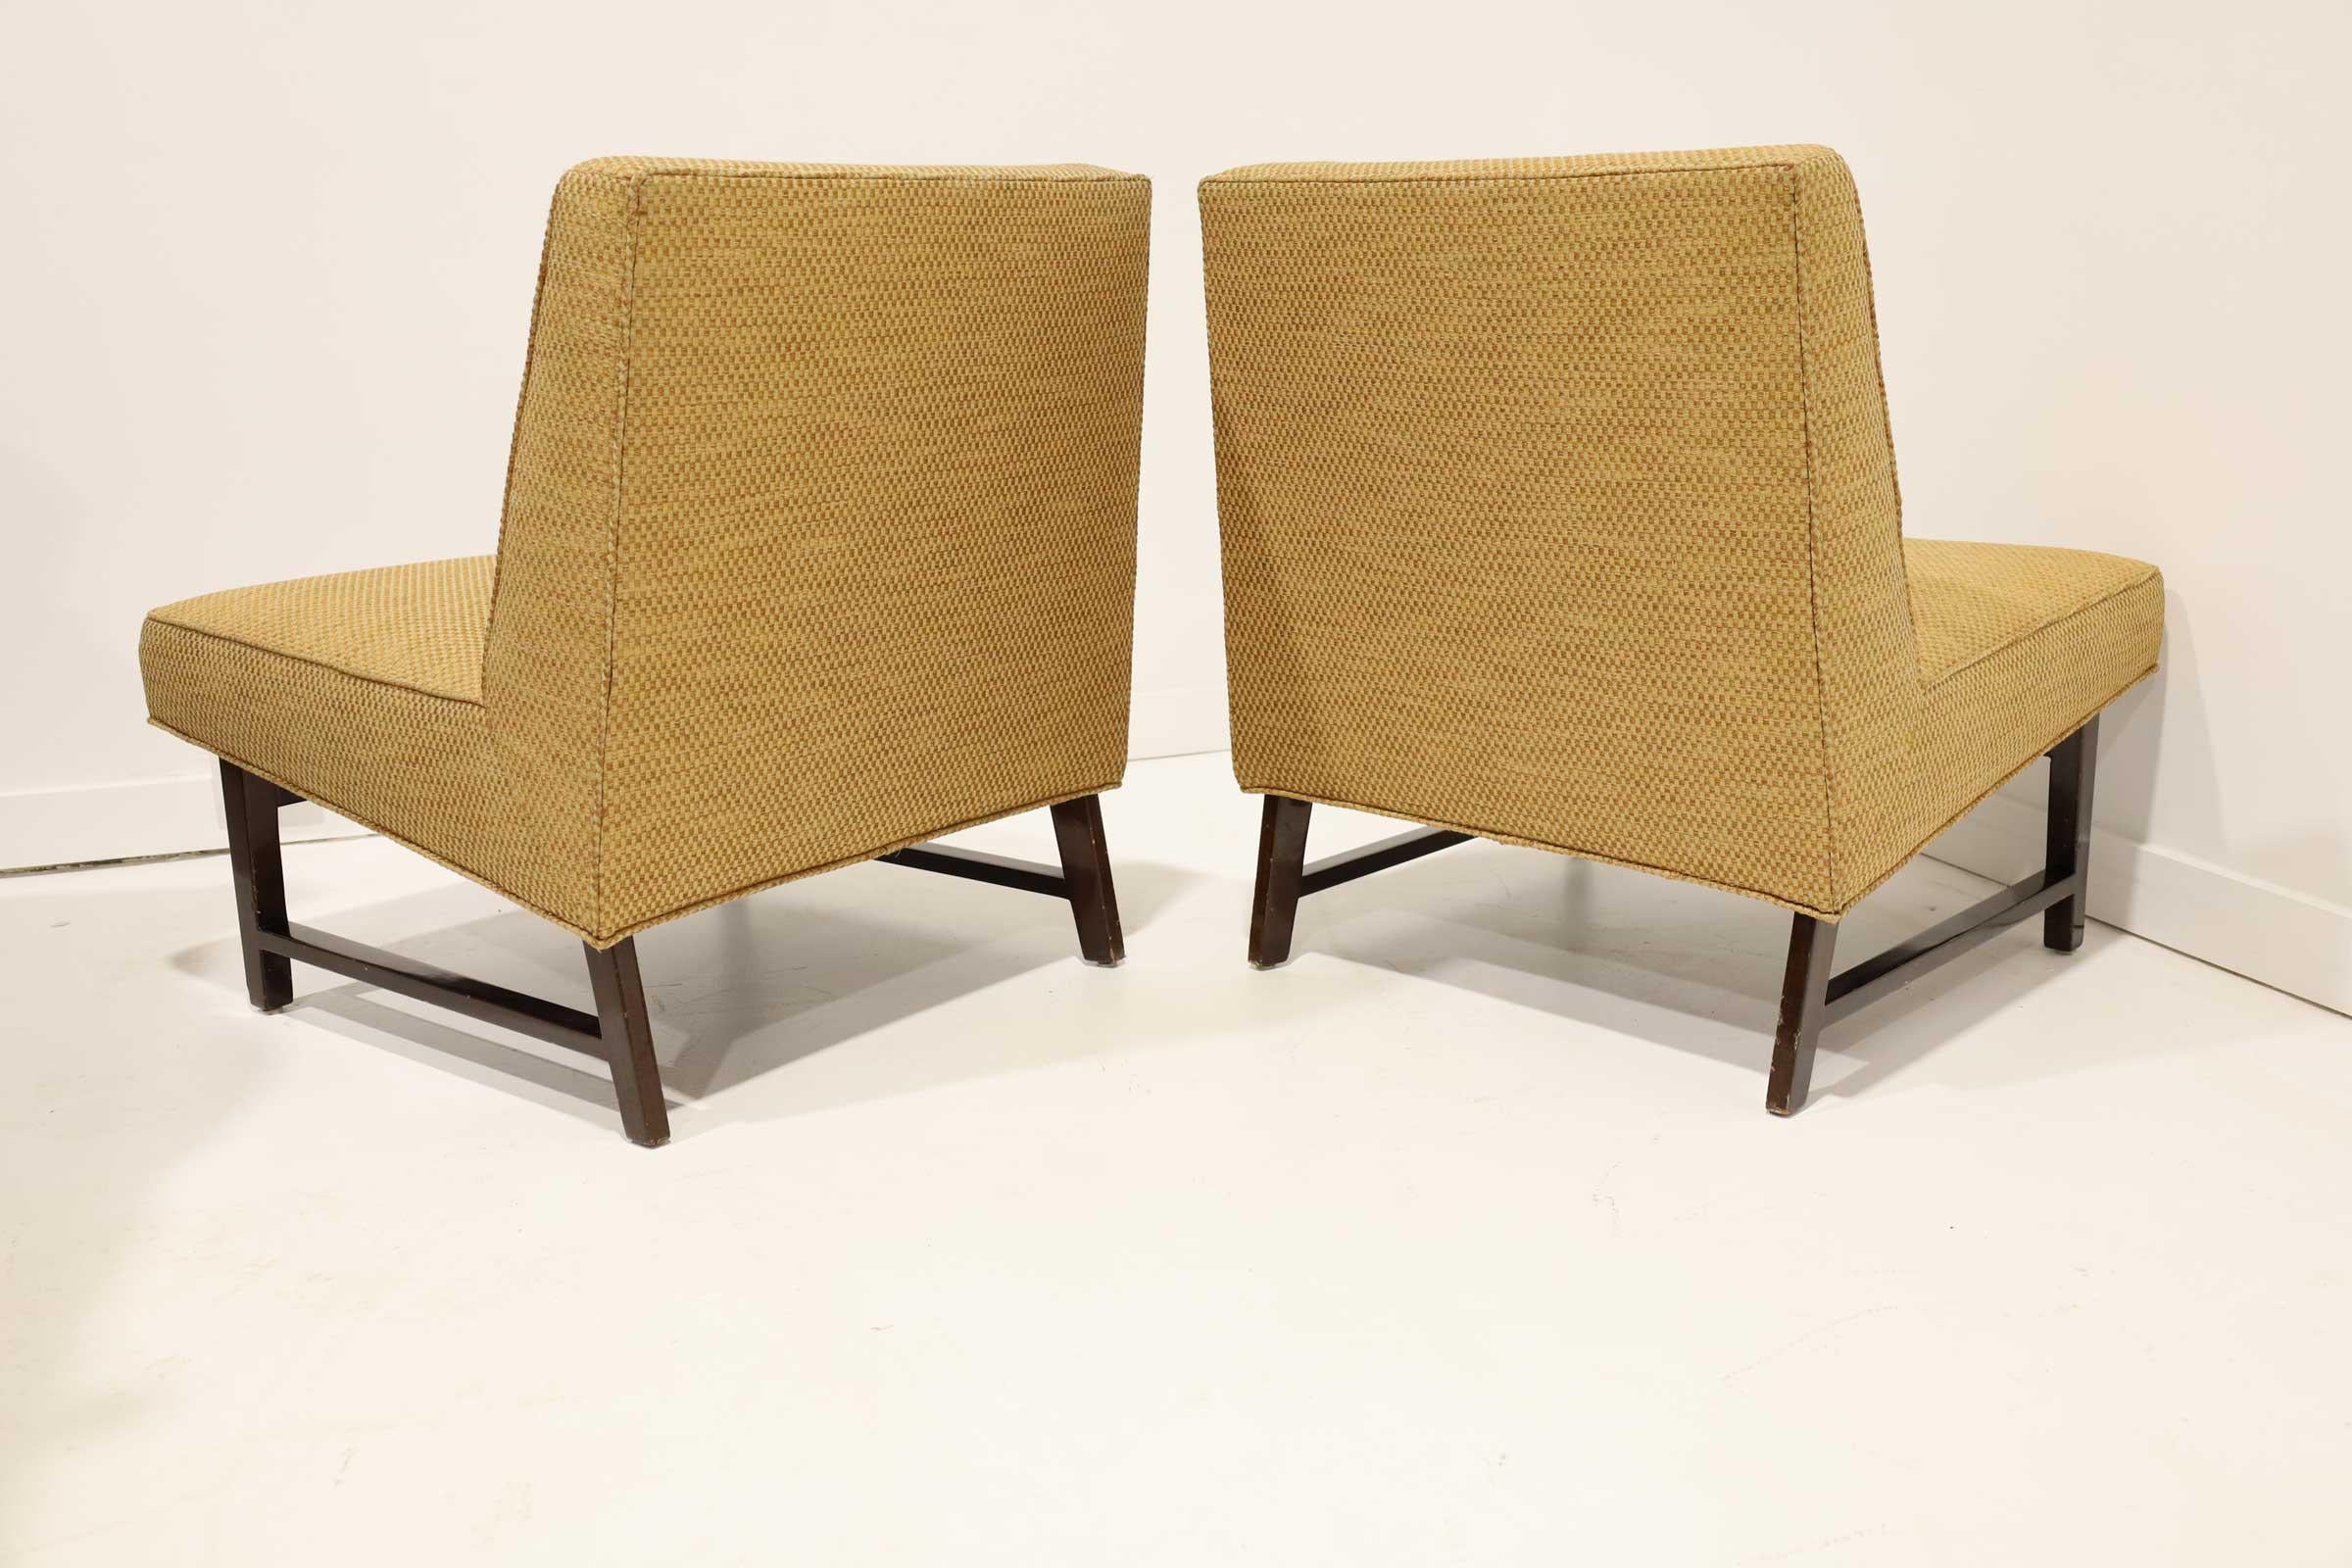 Pair of Edward Wormley for Dunbar Slipper Chairs in Gold Color Upholstery 1